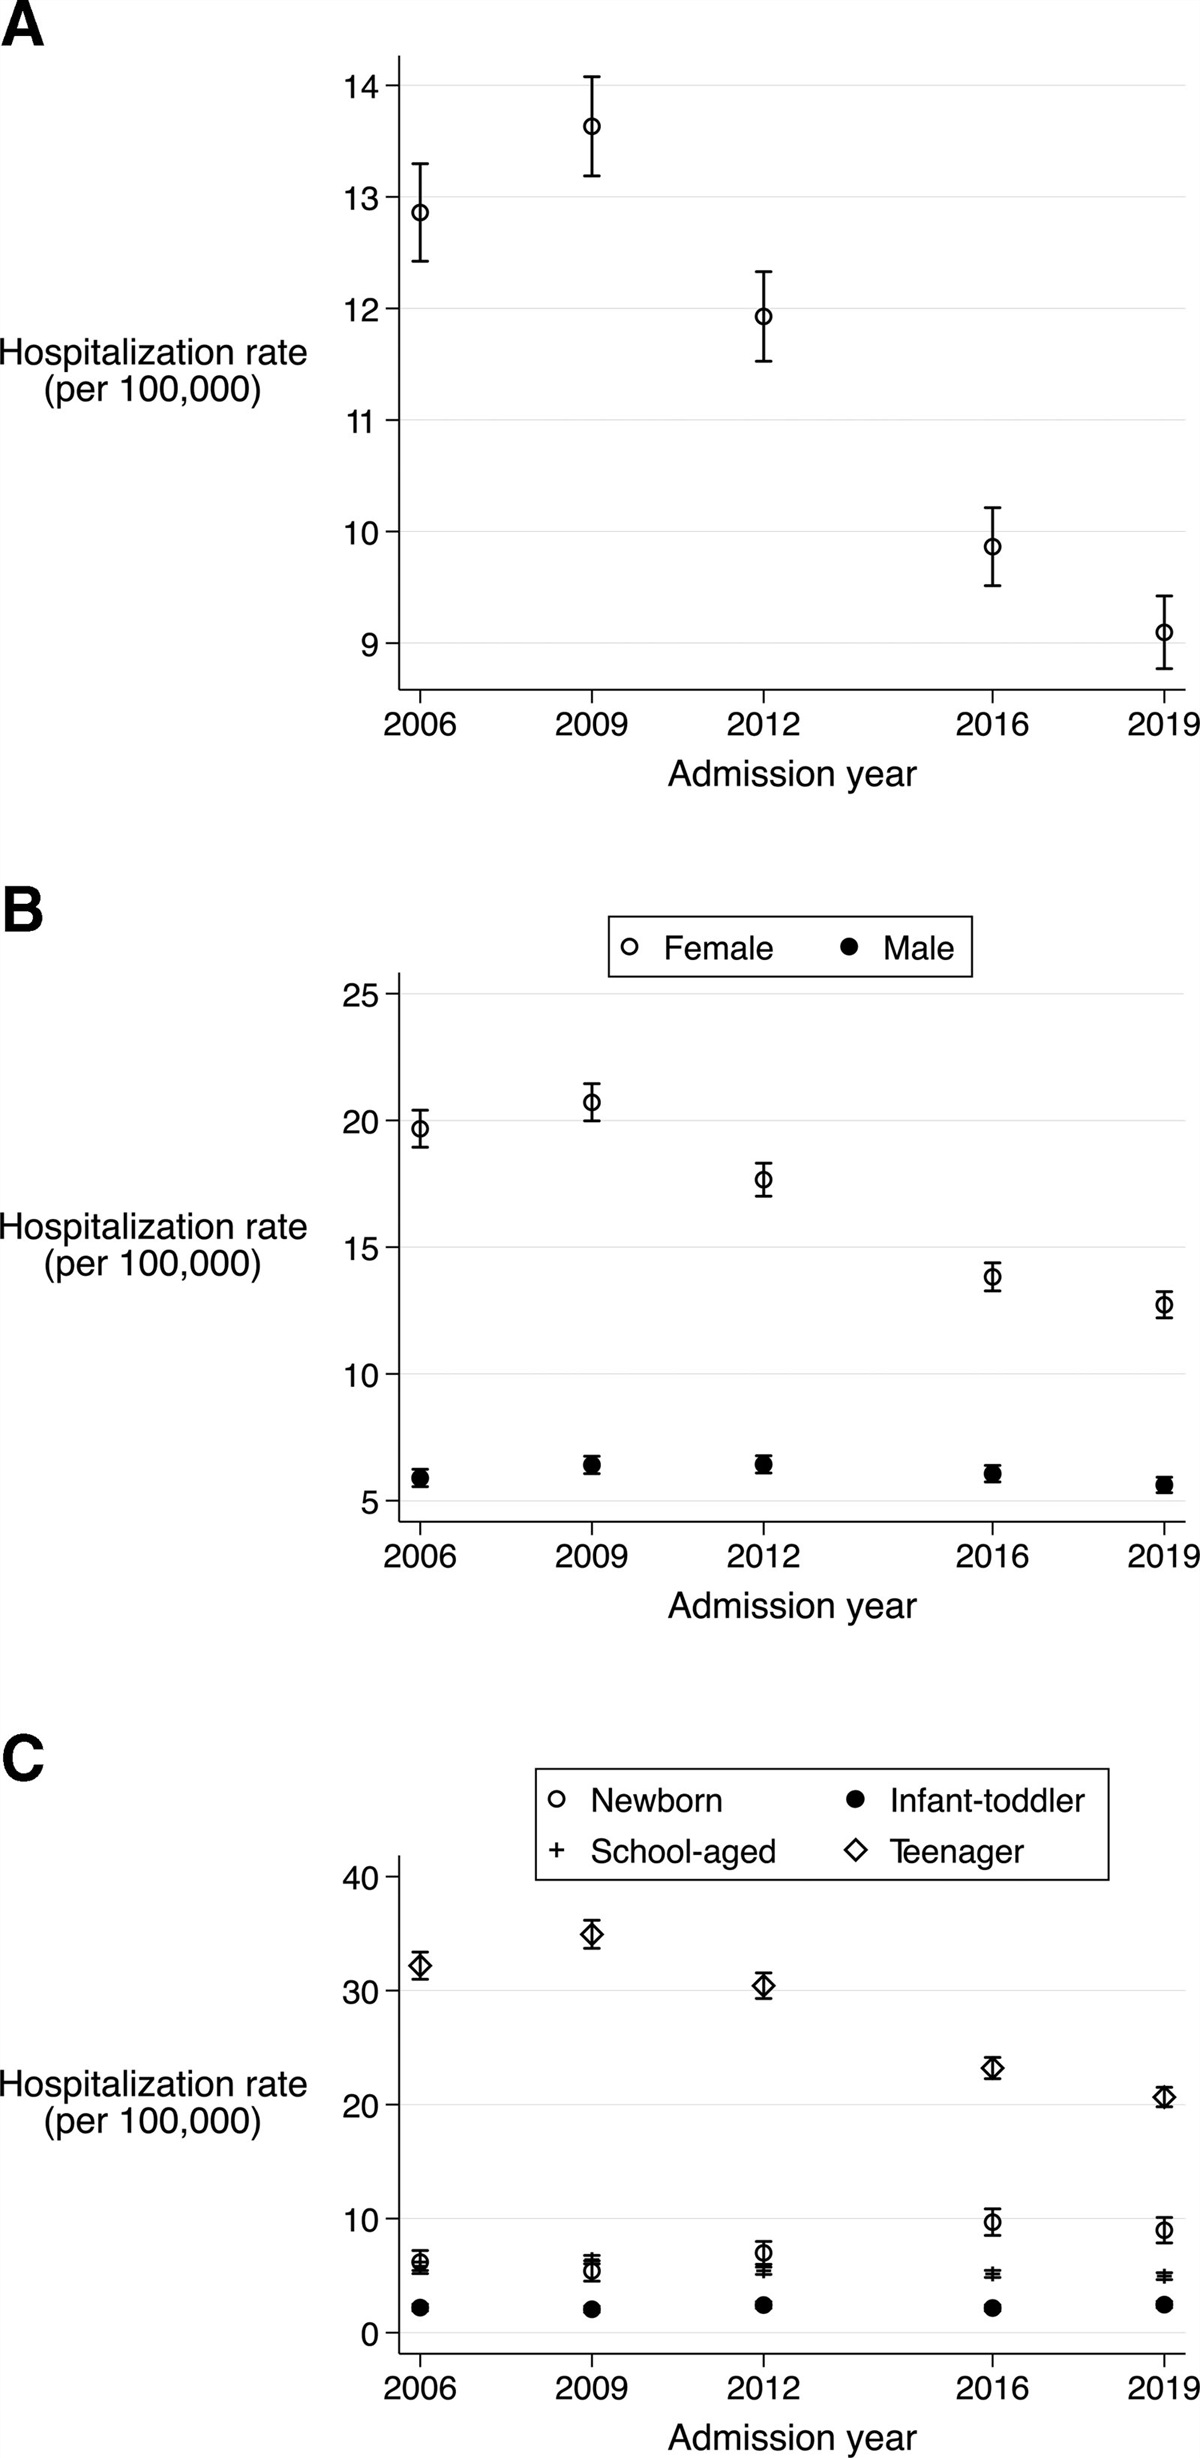 Pediatric Cholelithiasis in the United States: National Hospitalization Trends, 2006 to 2019